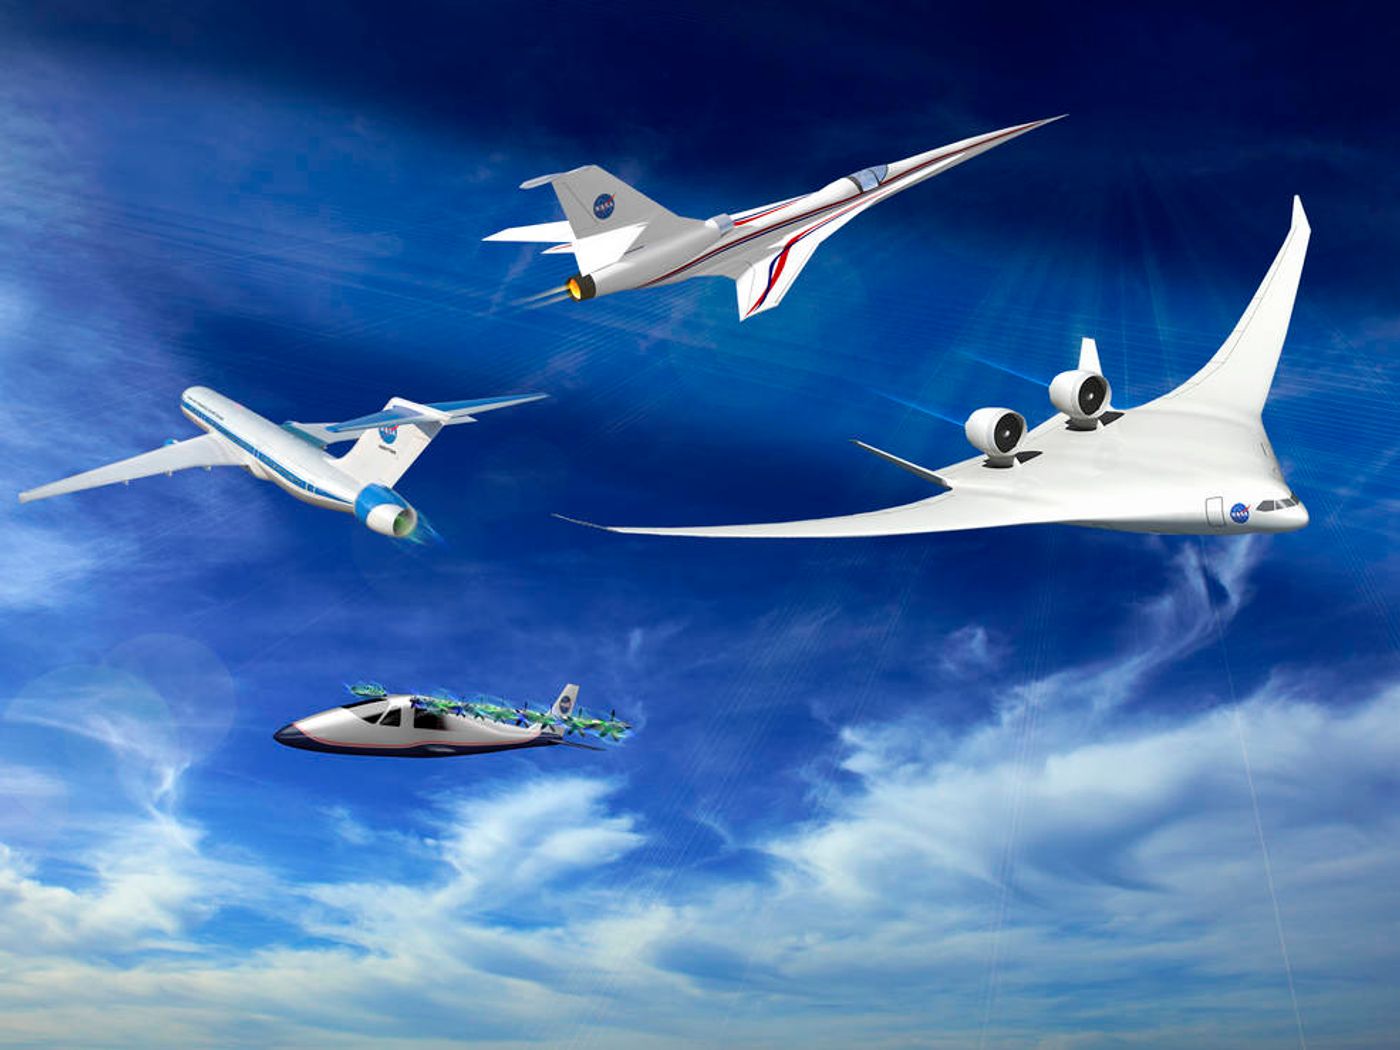 All of NASA's X-plane concepts, in one place.